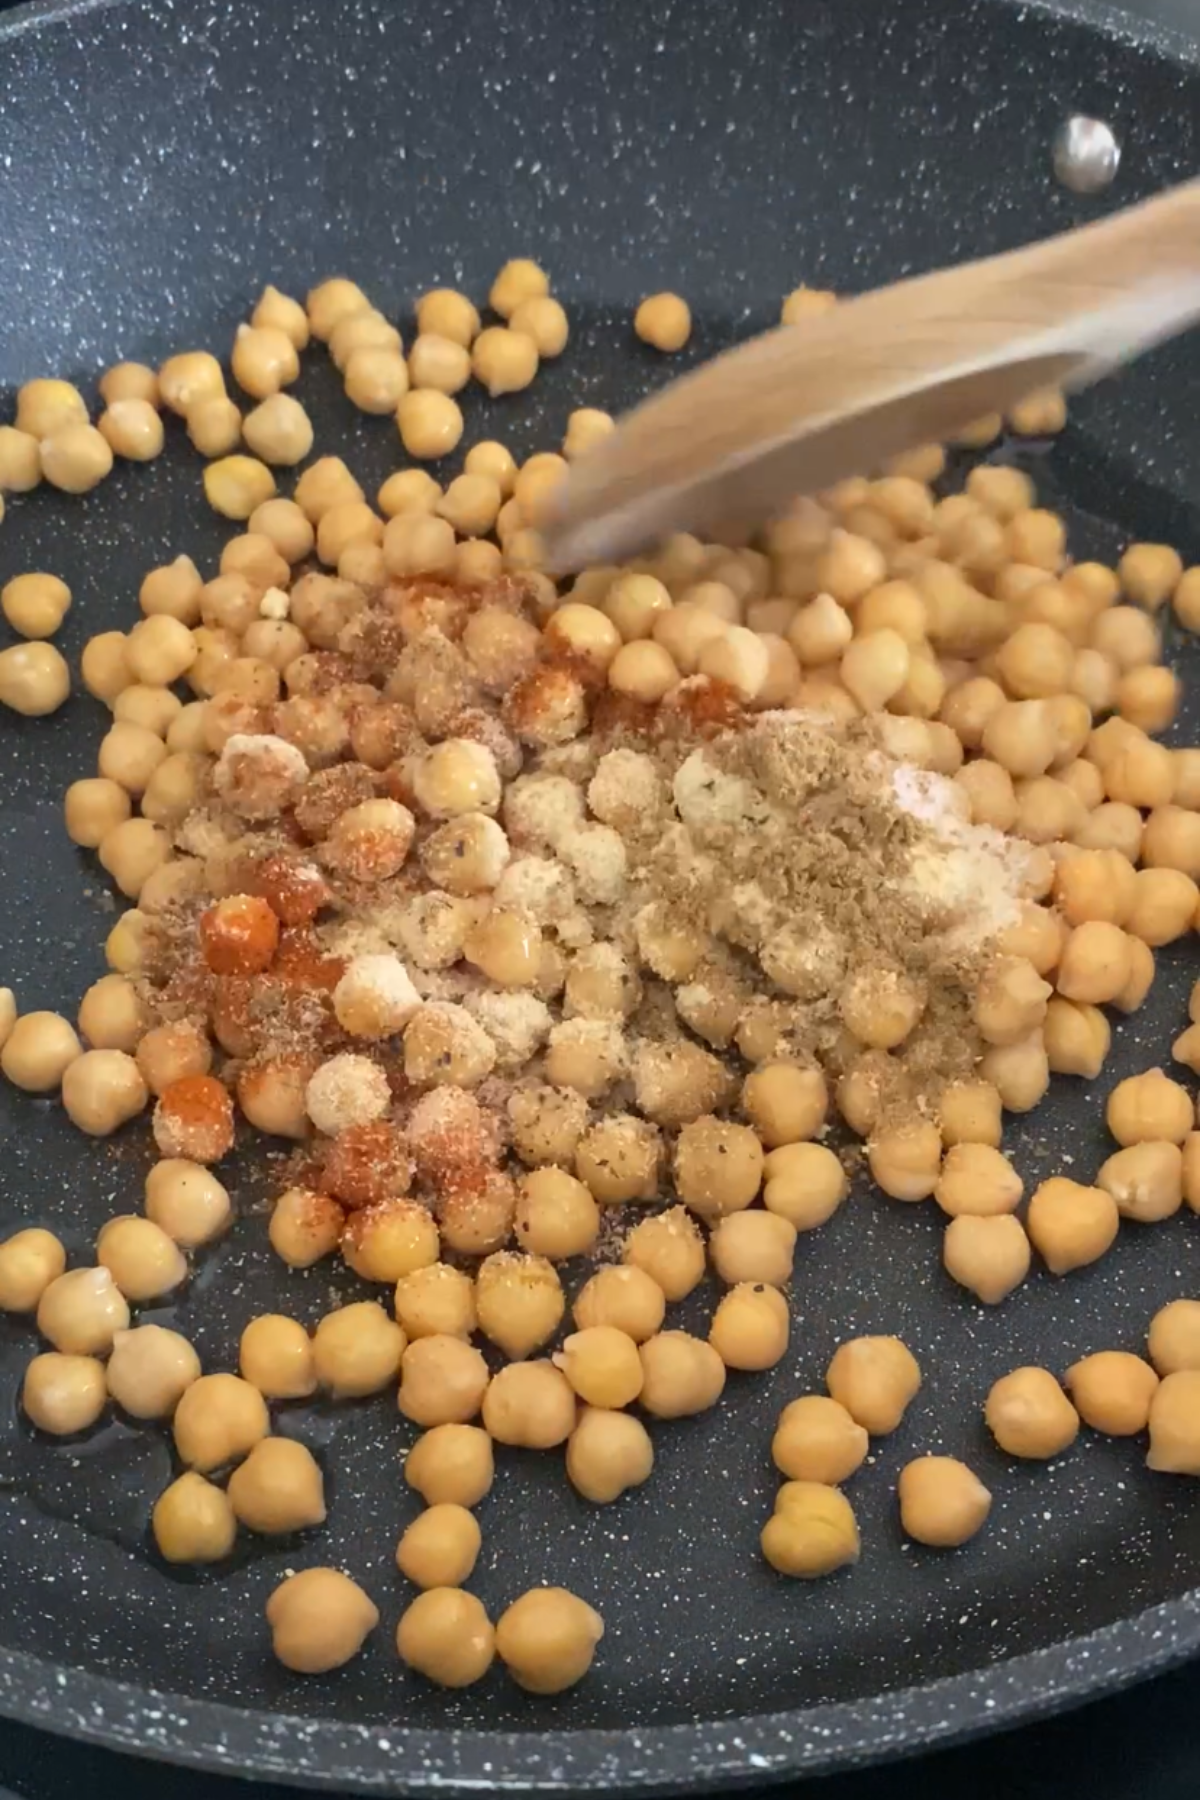 Chickpeas and spices in a pan.